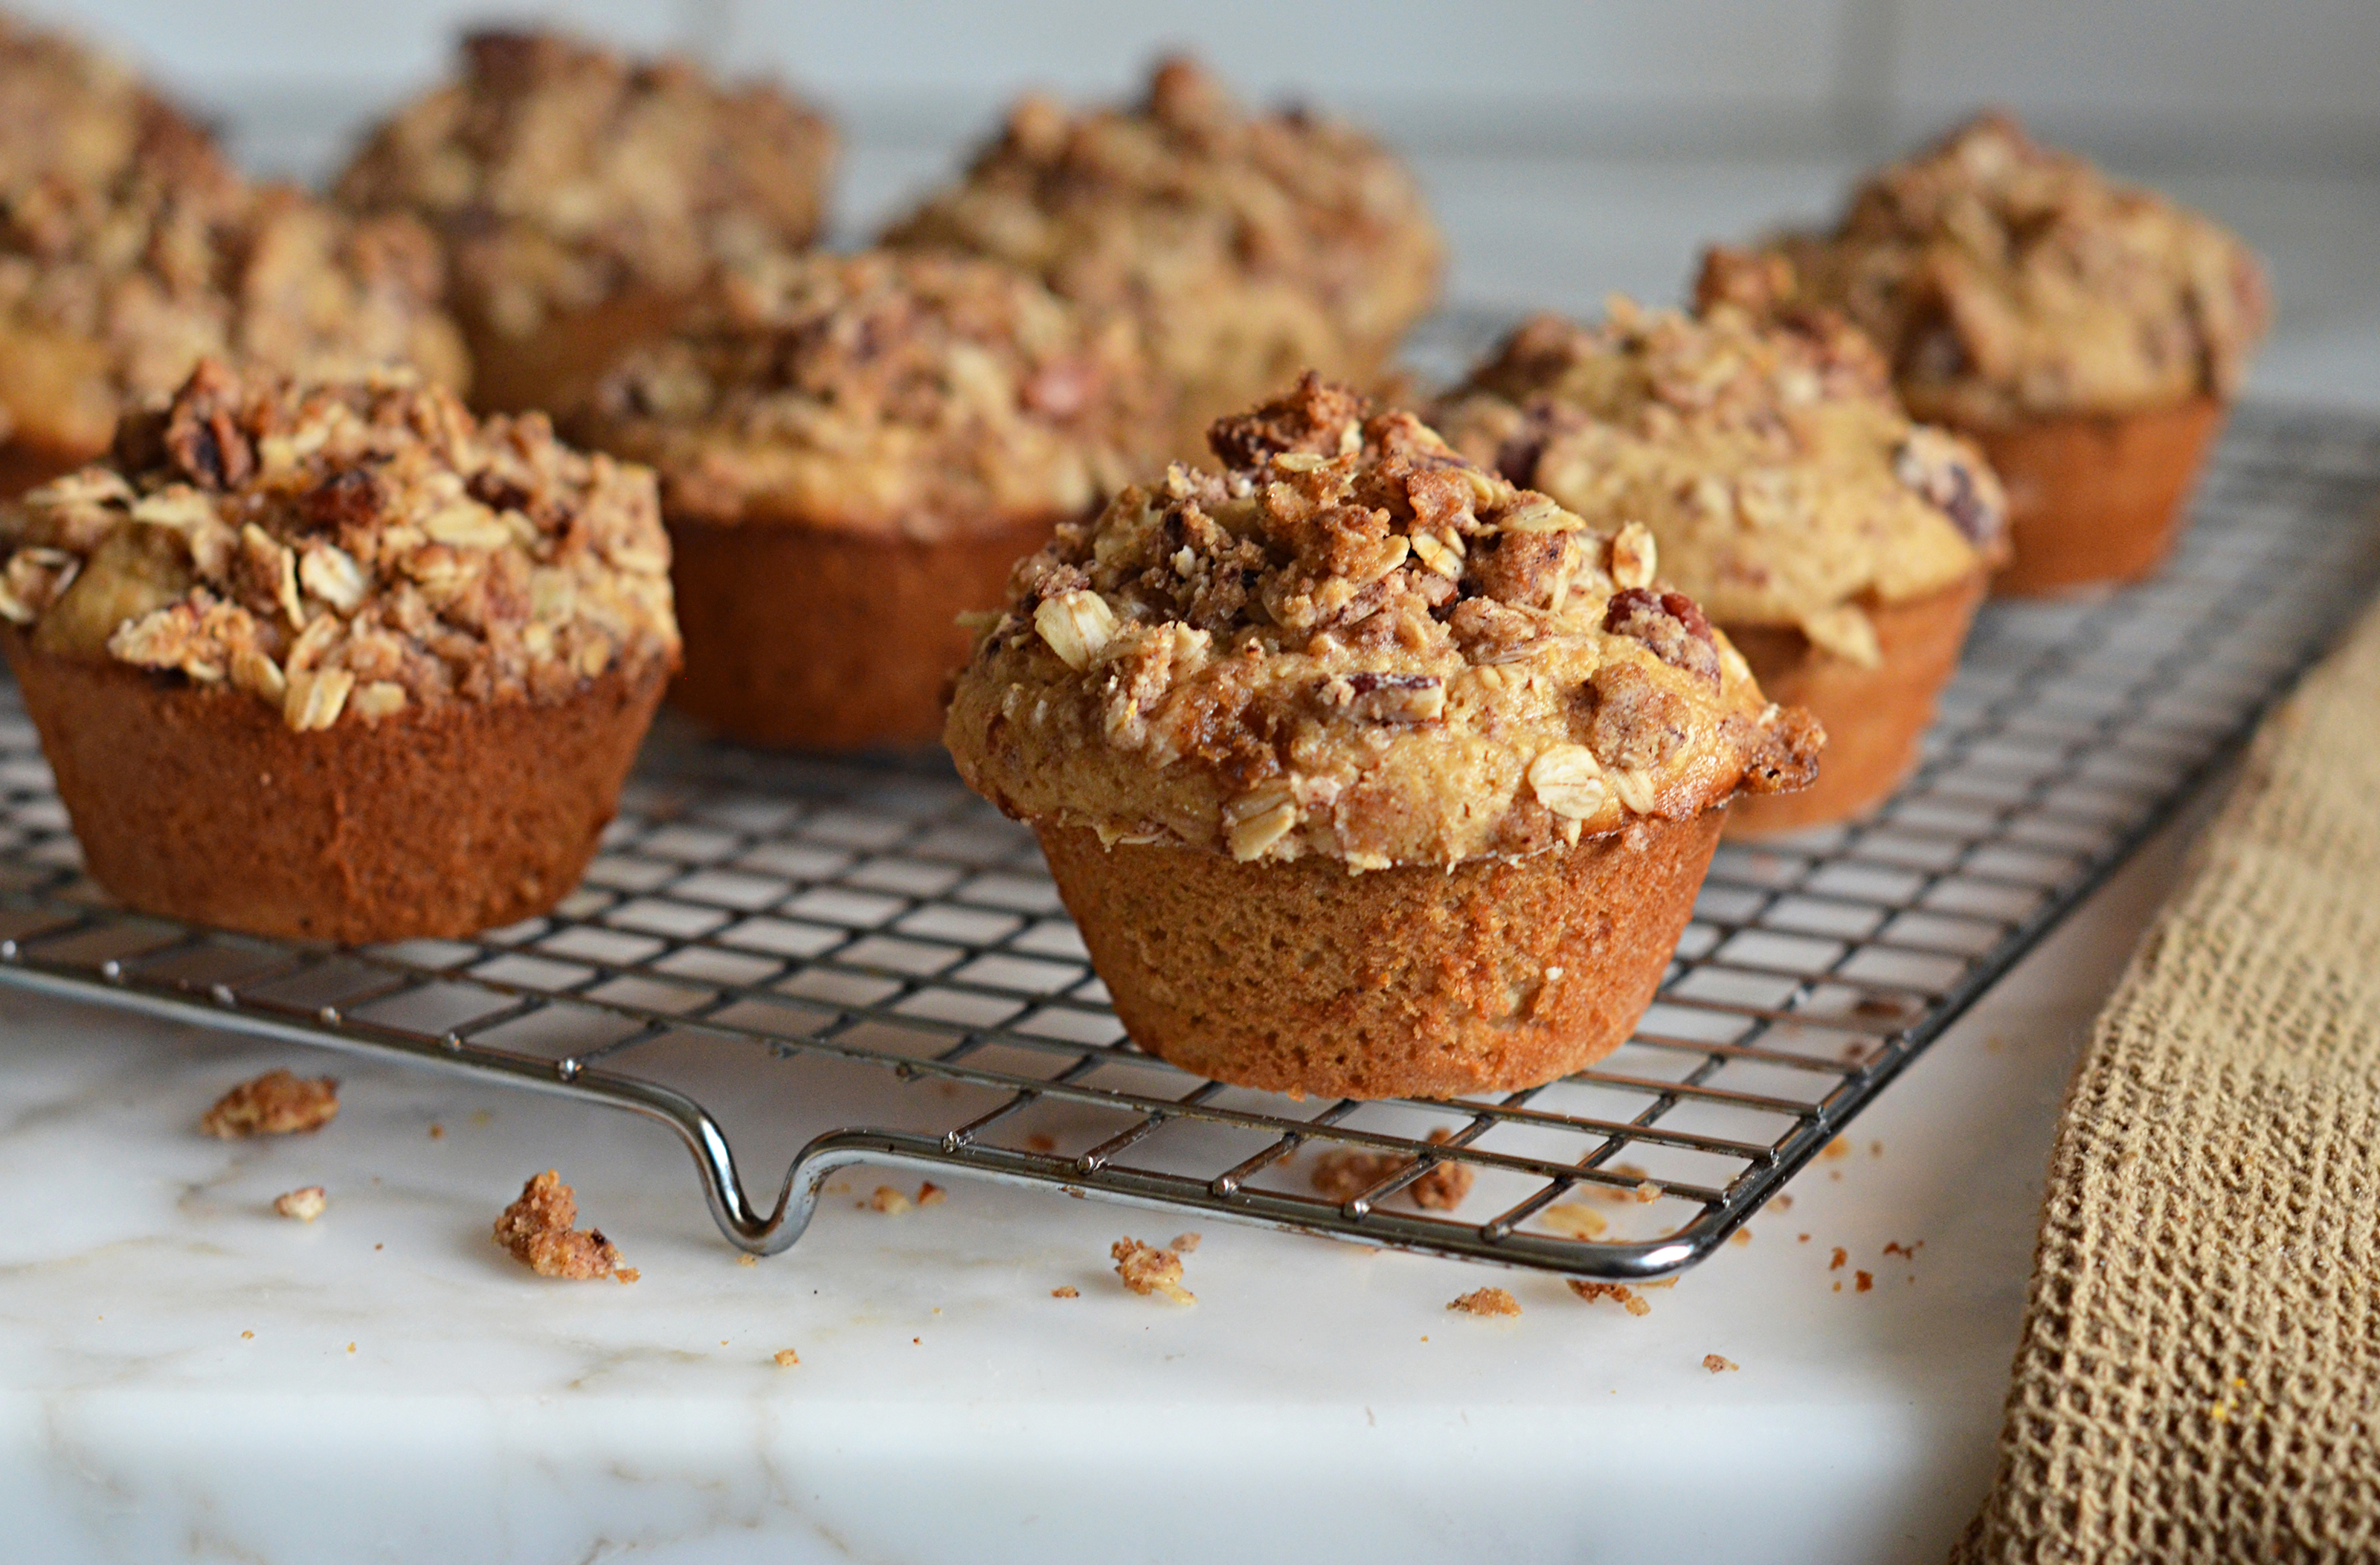 https://www.onceuponachef.com/images/2015/10/Oatmeal-Muffins-with-Pecan-Streusel1.jpg